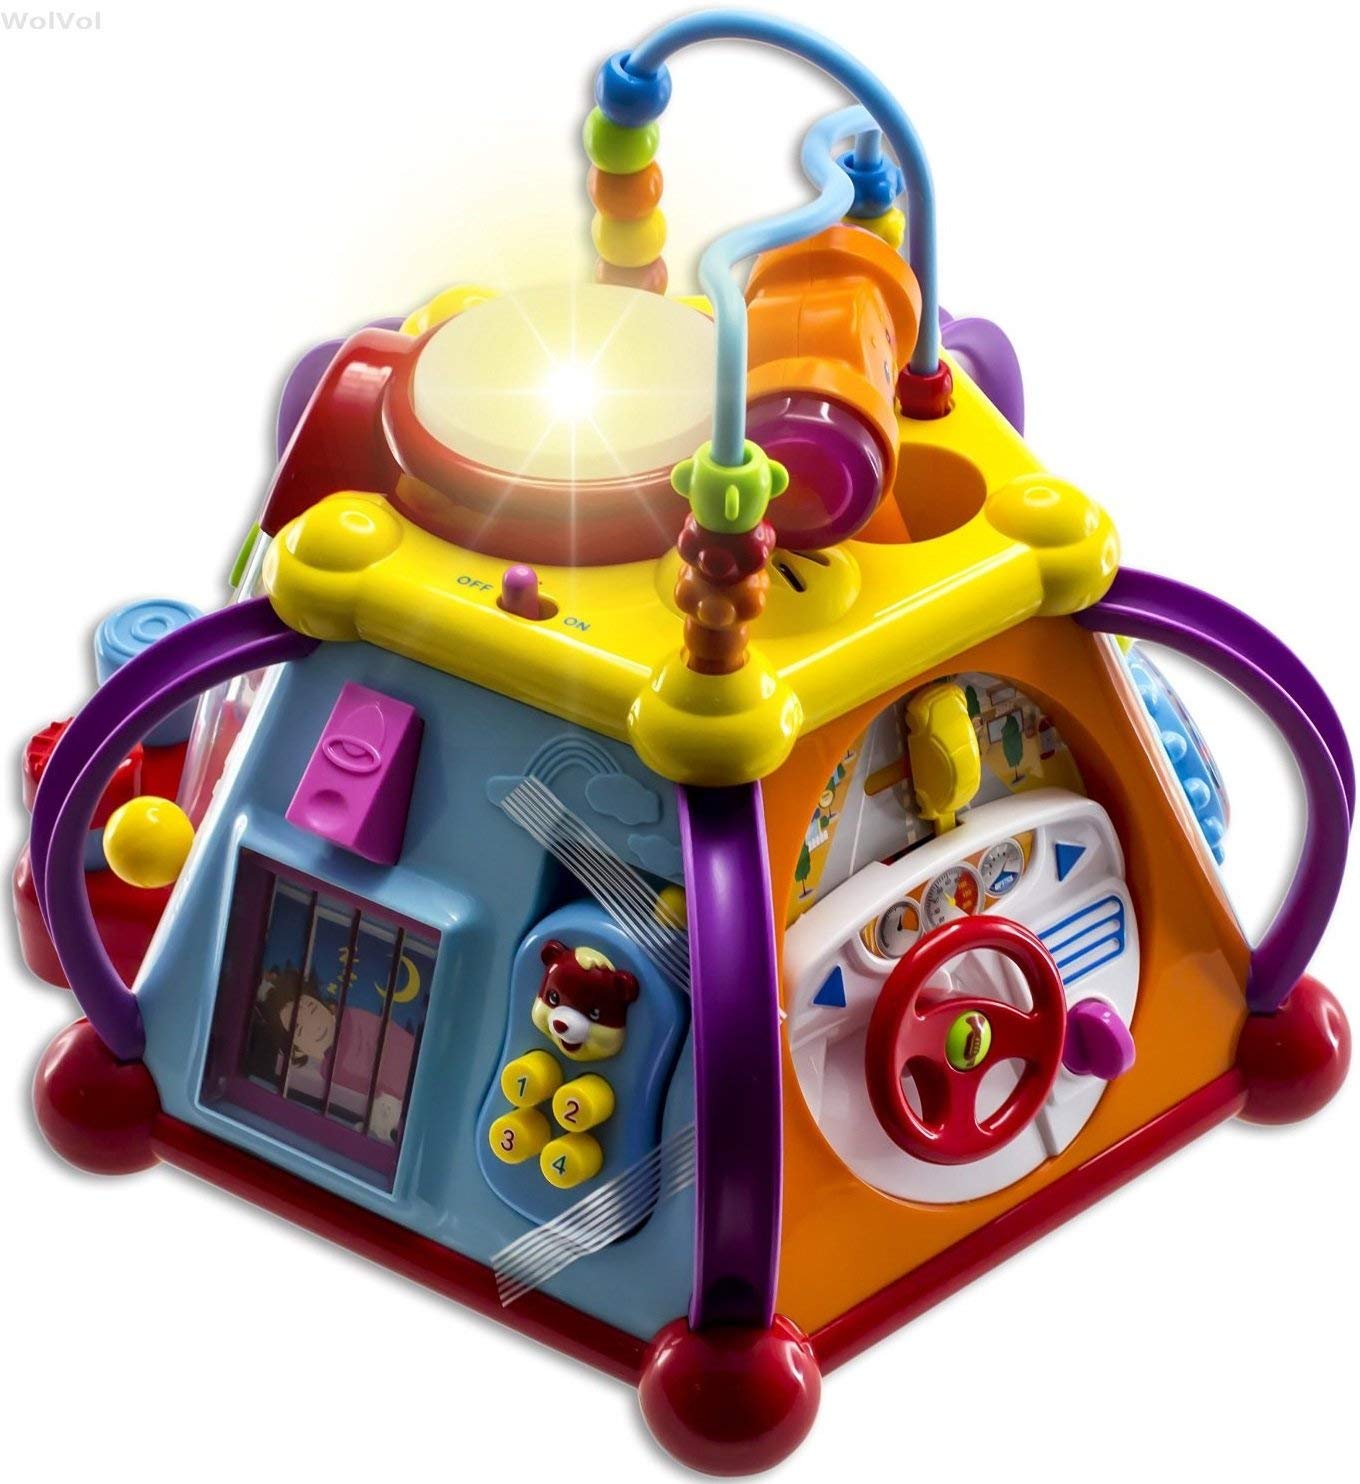 WolVol Educational Kids Toddler Baby Toy Musical Activity Cube review